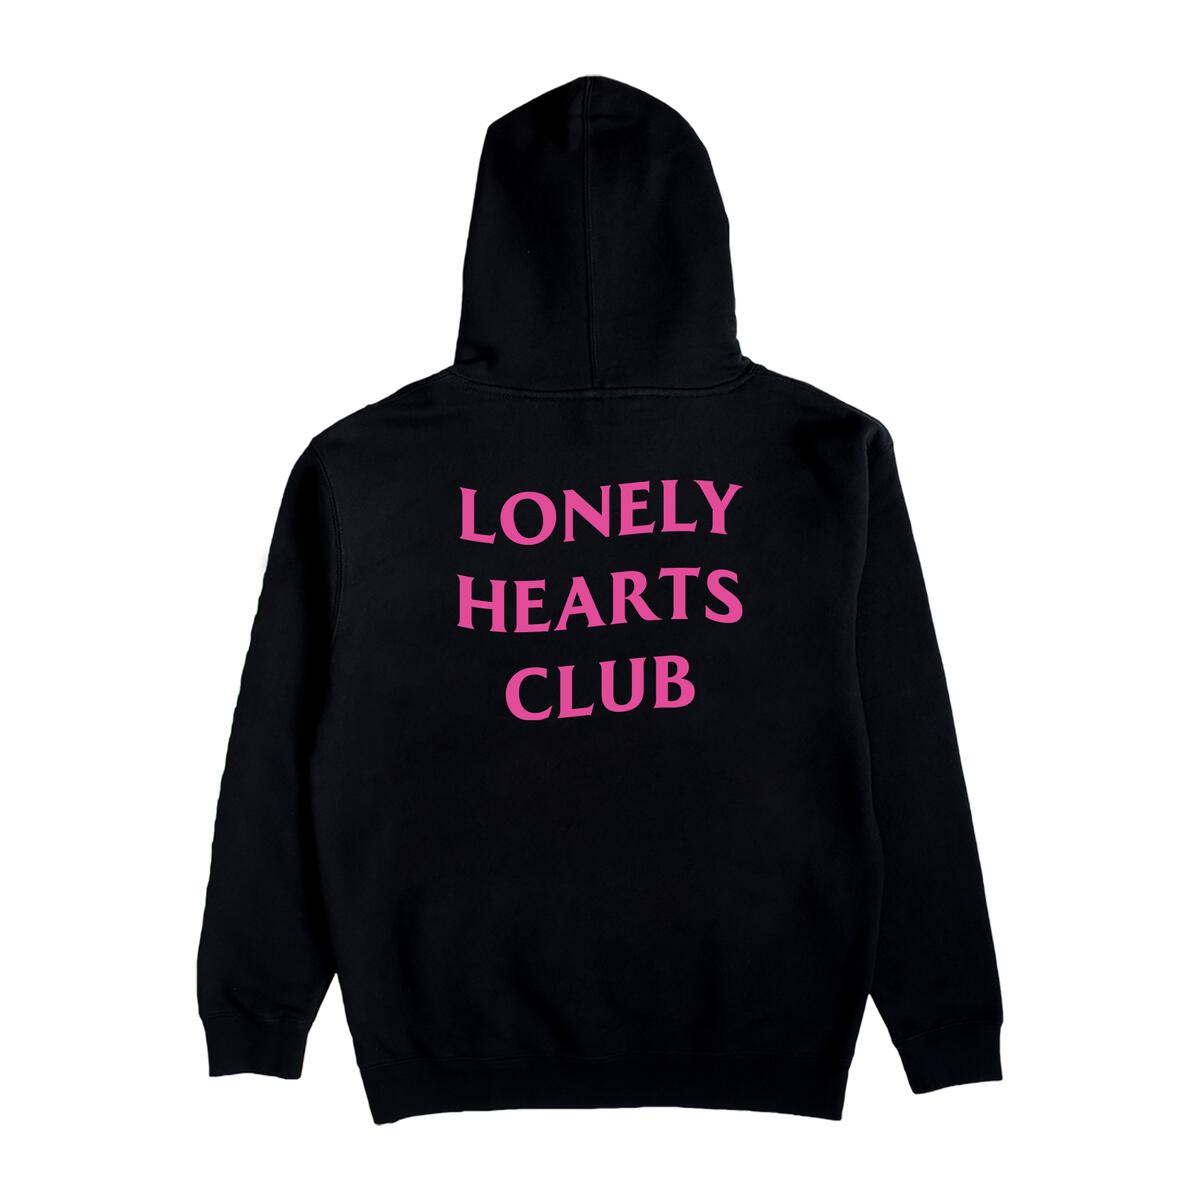 Lonely Hearts Club "Love Hurts" Hoodie